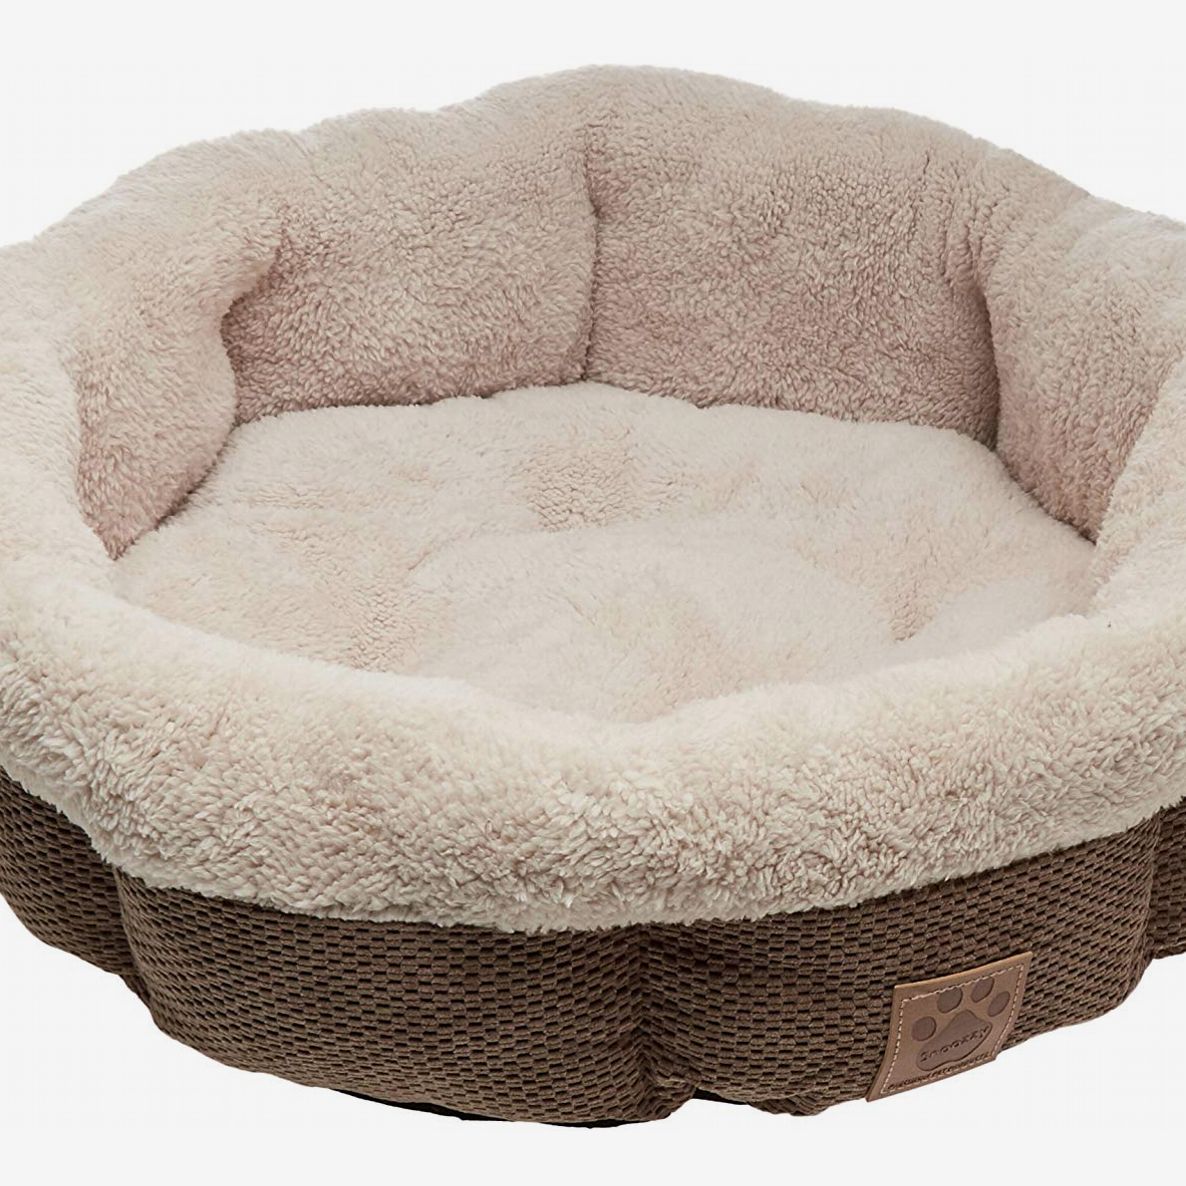 17 Best Dog Beds 2020 | The Strategist 